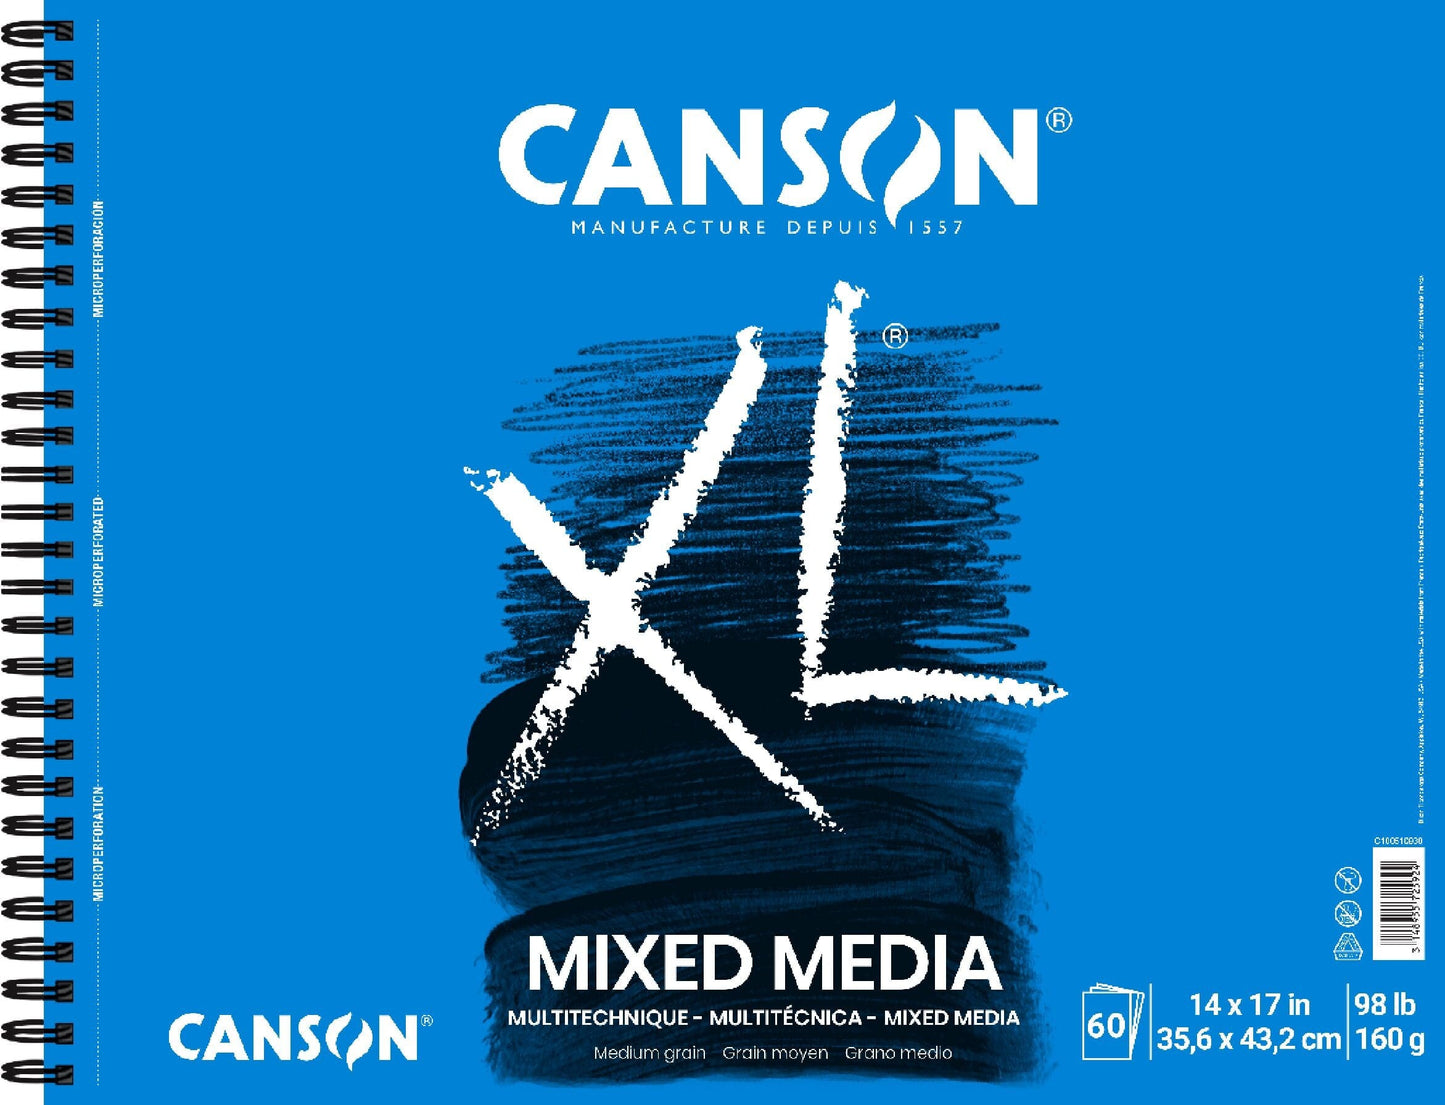  Canson XL Series Mixed Media Pad, Side Wire, 7x10 inches, 60  Sheets – Heavyweight Art Paper for Watercolor, Gouache, Marker, Painting,  Drawing, Sketching : Arts, Crafts & Sewing